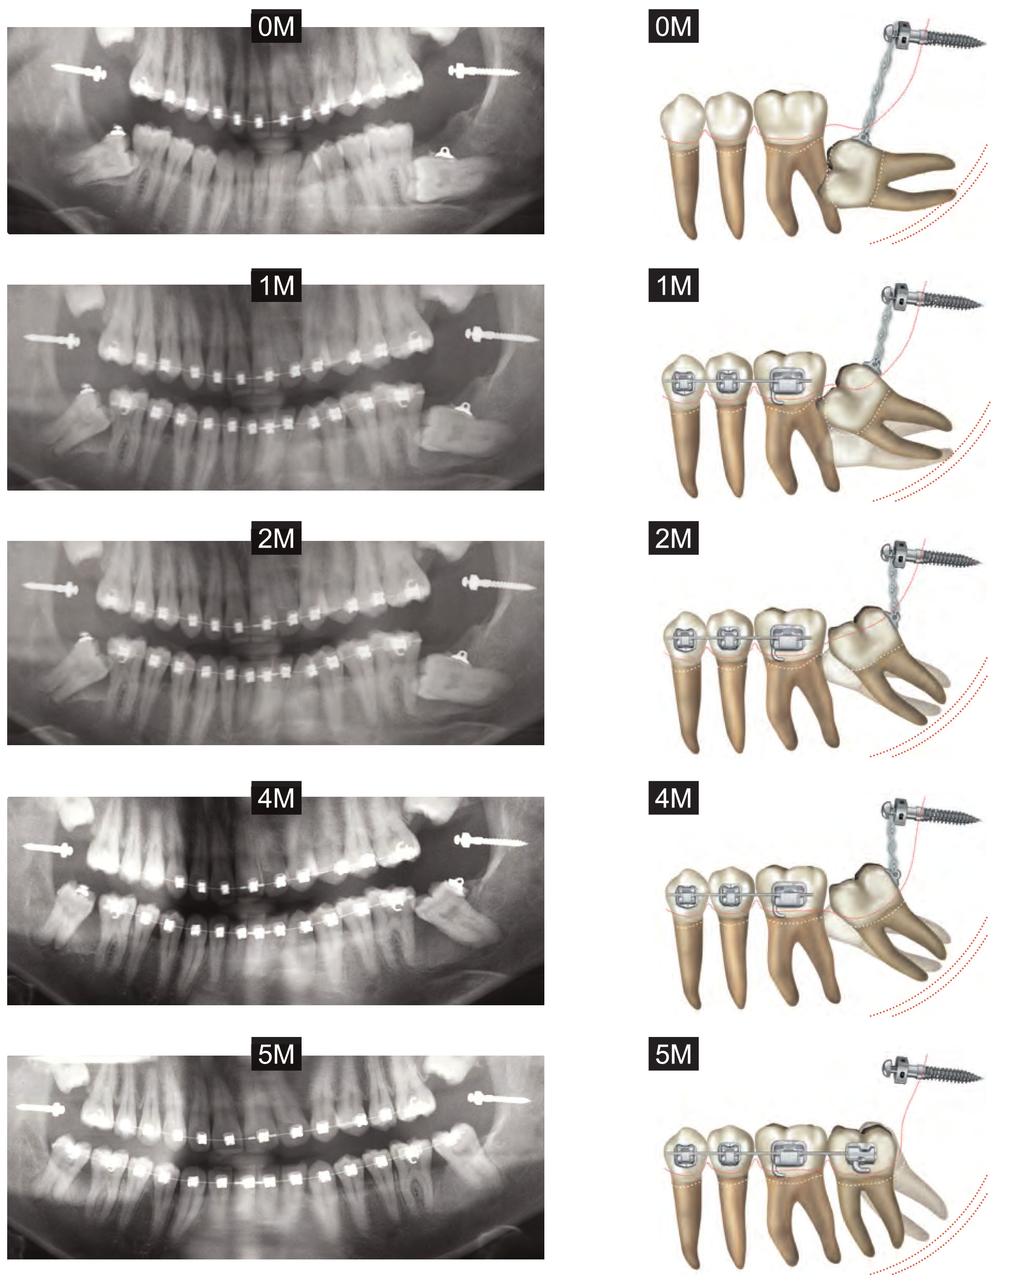 Figure 5: On the left, a series of panoramic films document tooth positions immediately after surgery (0m), then at 1